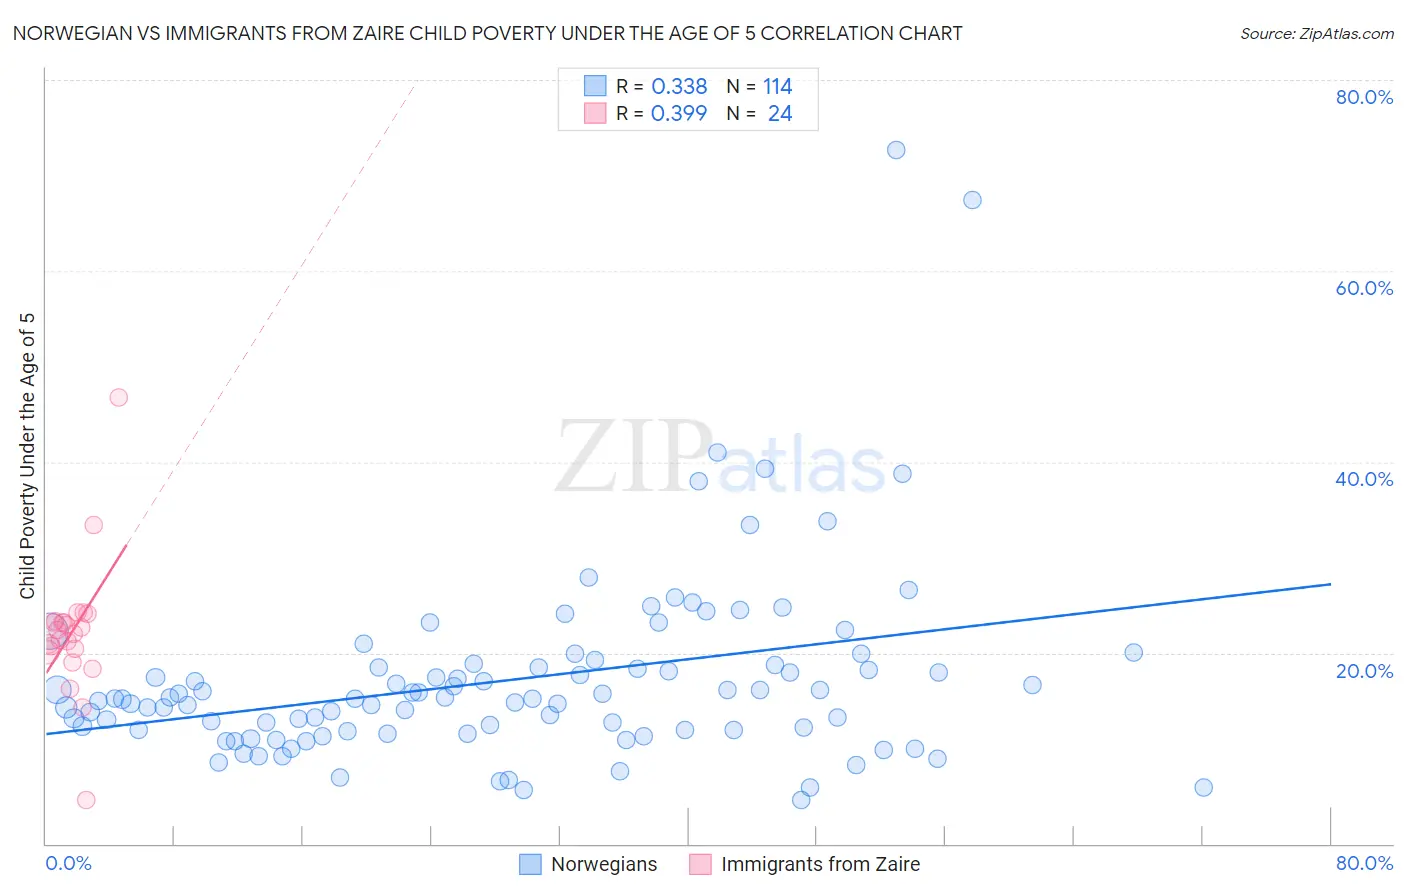 Norwegian vs Immigrants from Zaire Child Poverty Under the Age of 5